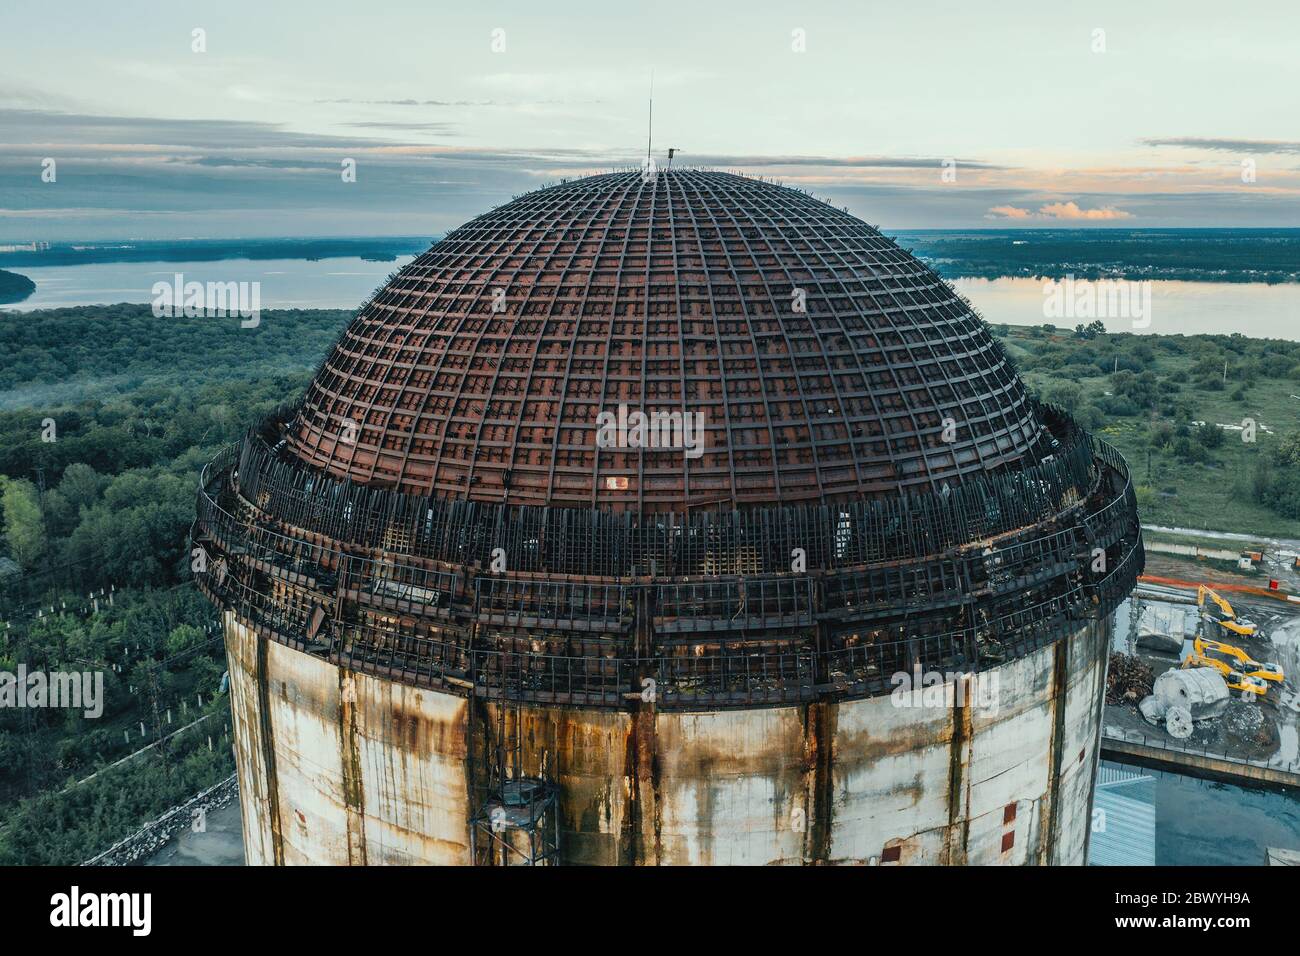 Unfinished nuclear power plant, circle metal construction dome roof, industrial building, aerial top view. Stock Photo